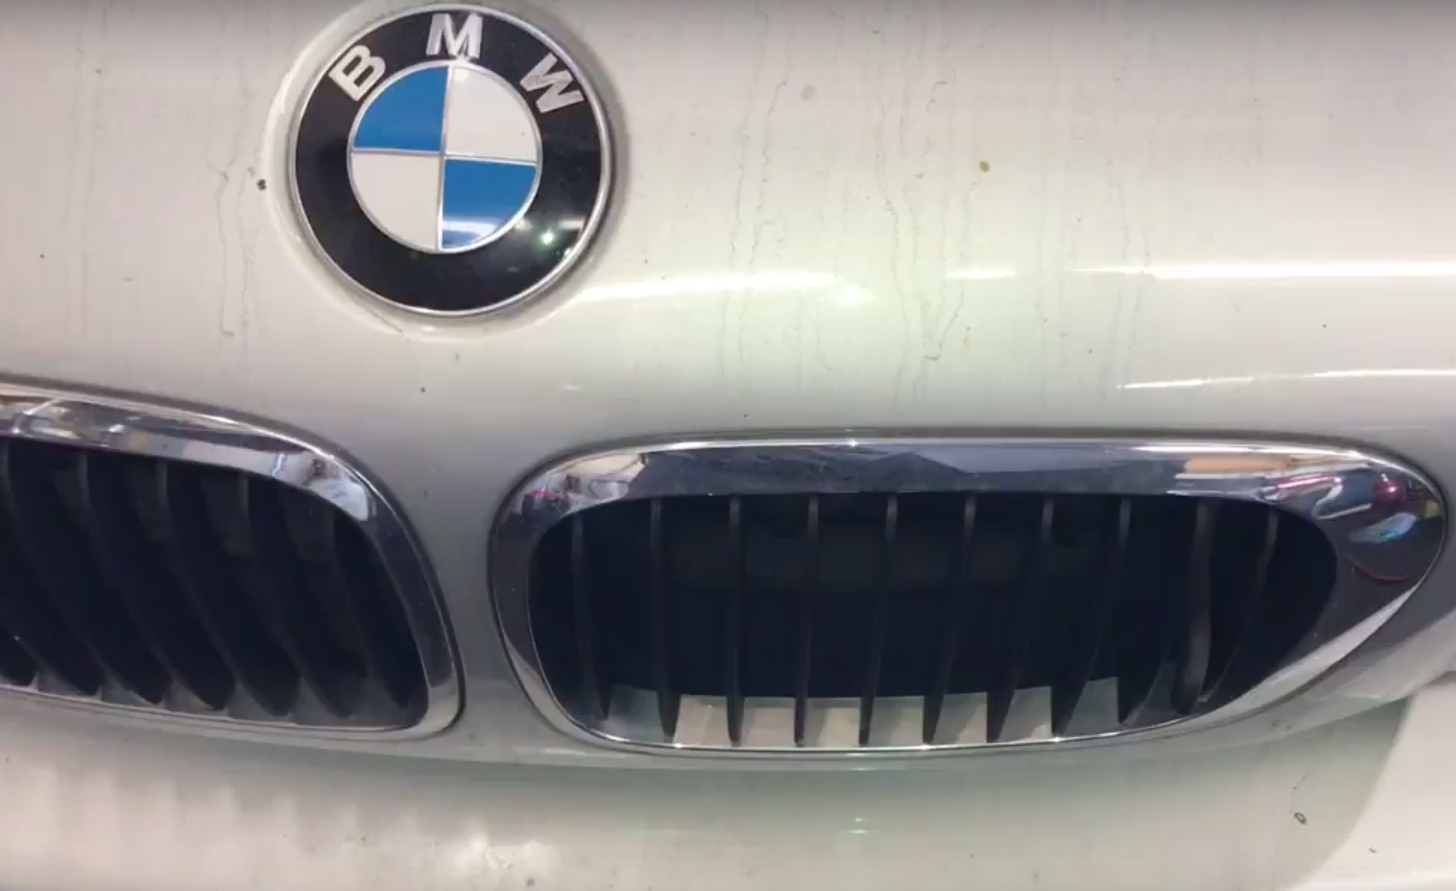 BMW 1 Series Opening Hood / Bonnet  How to access BMW engine bay for  general Maintenance 